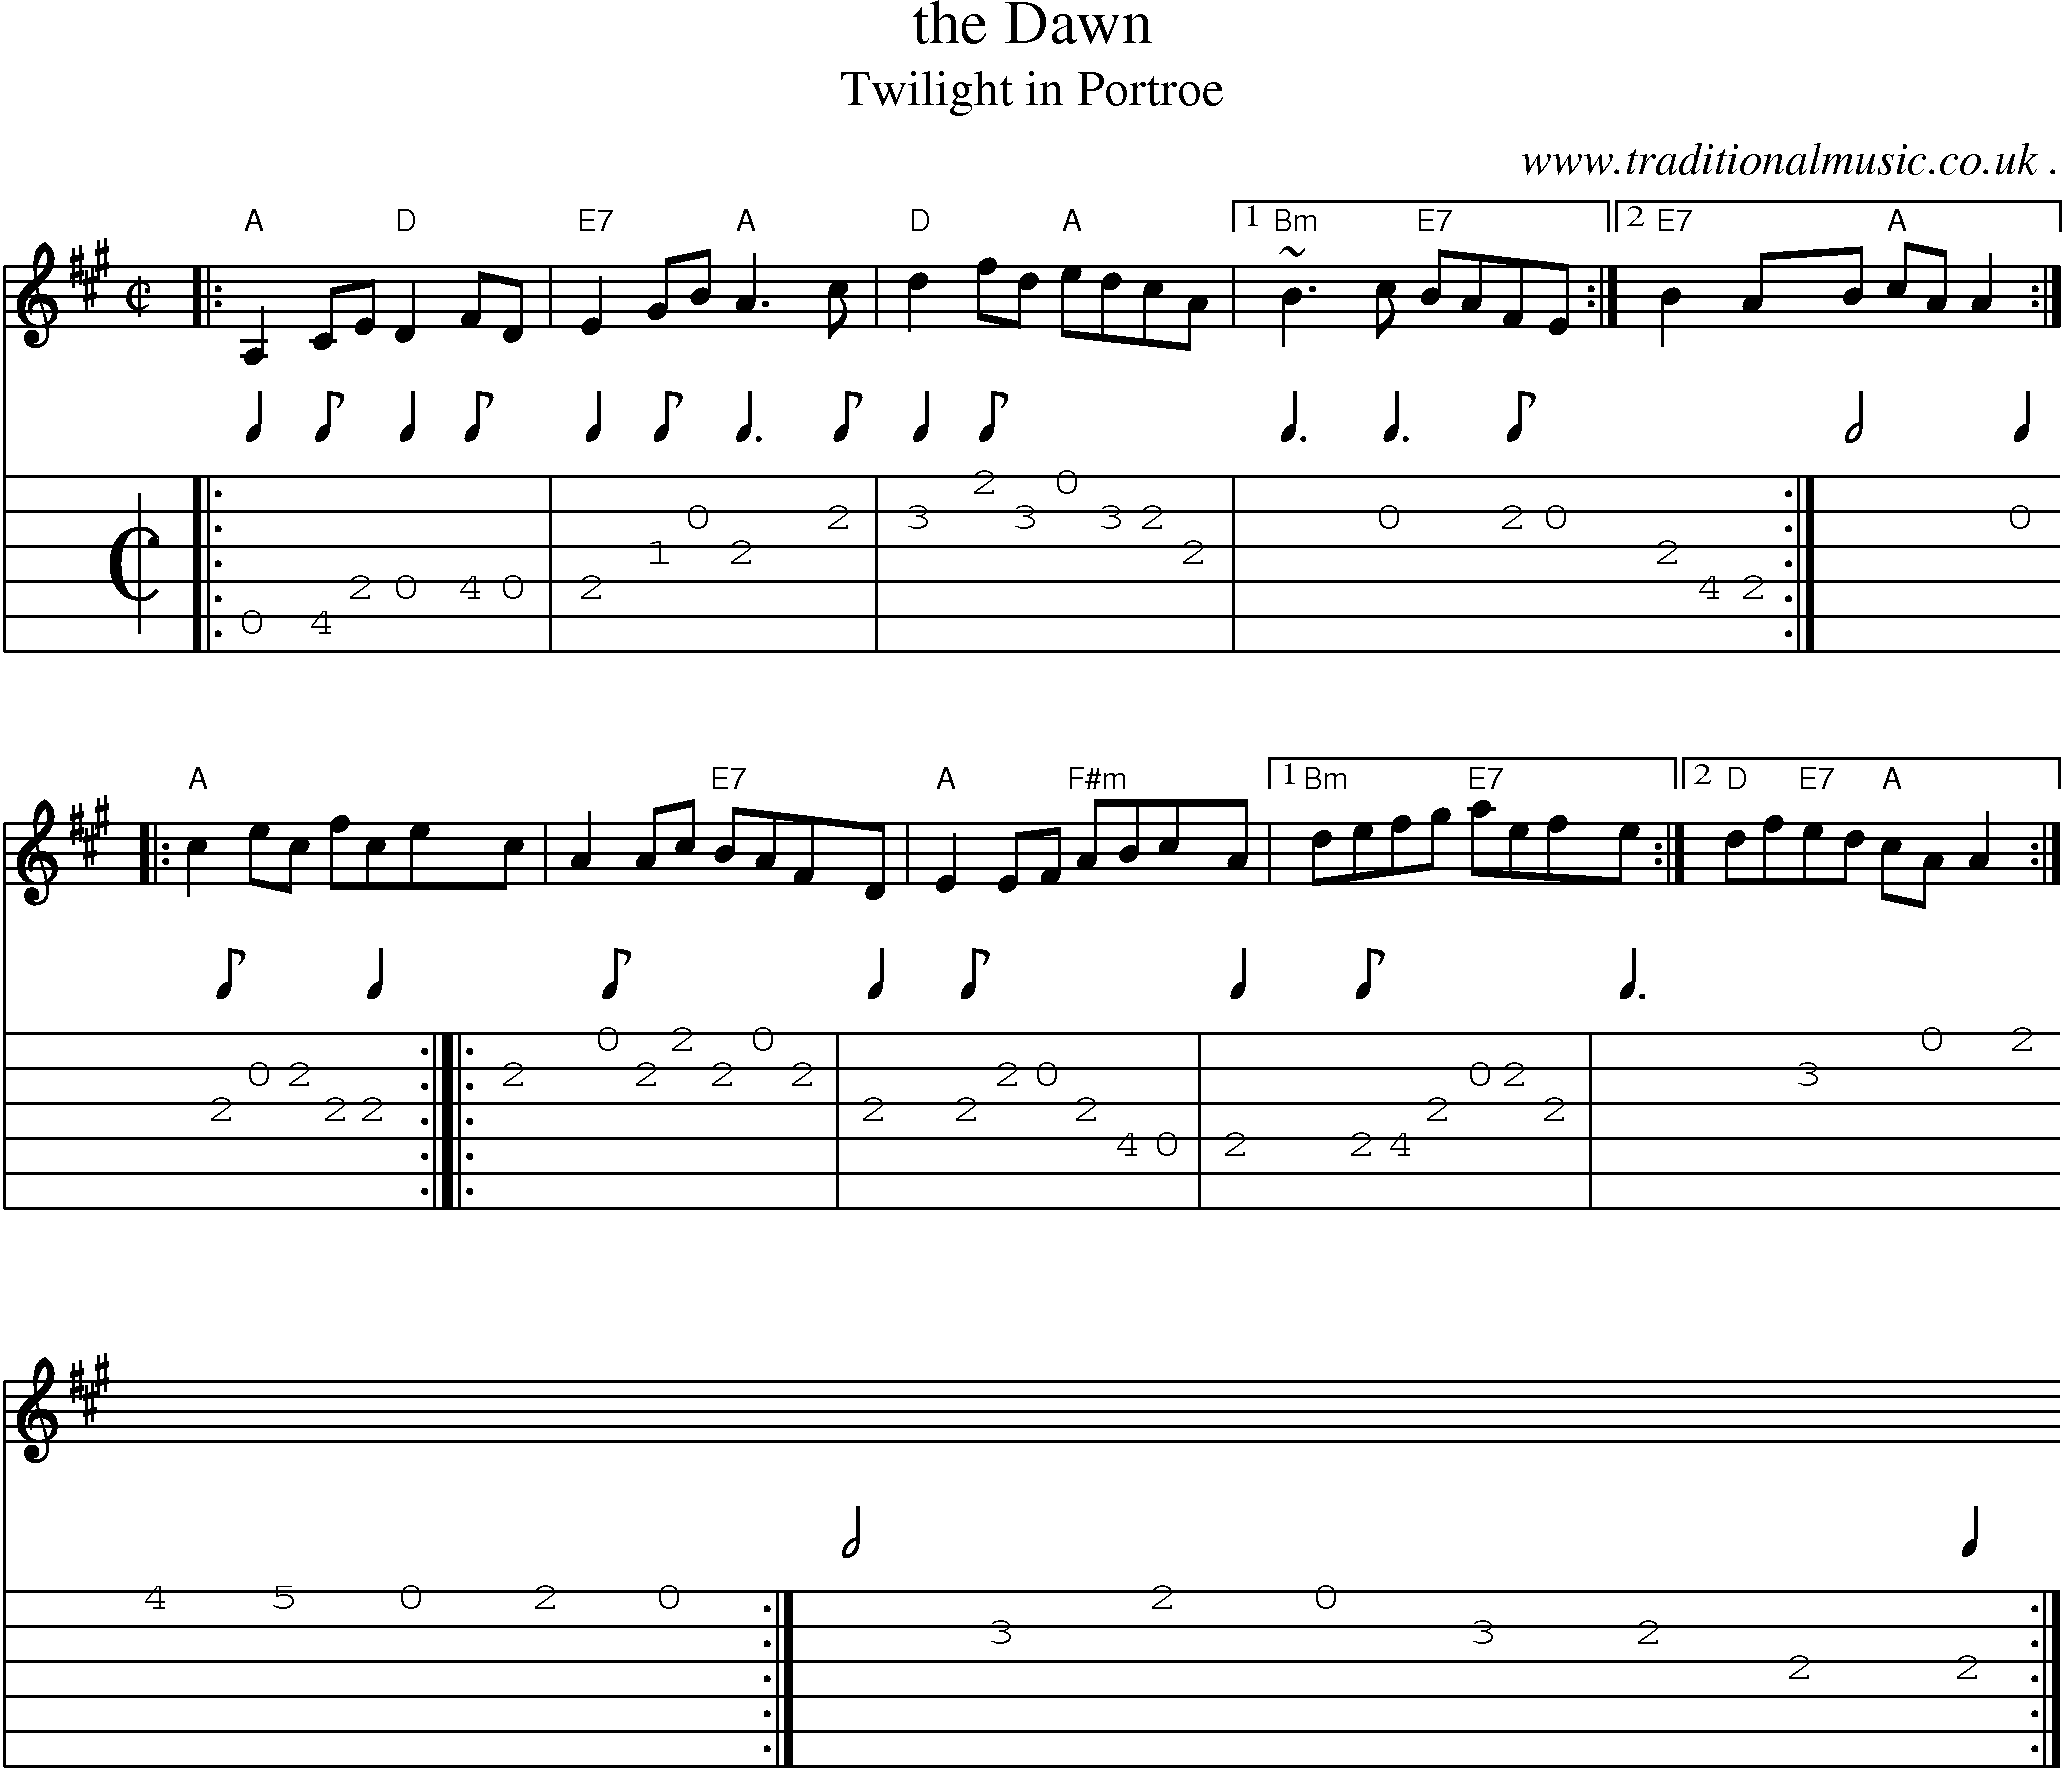 Sheet-music  score, Chords and Guitar Tabs for The Dawn